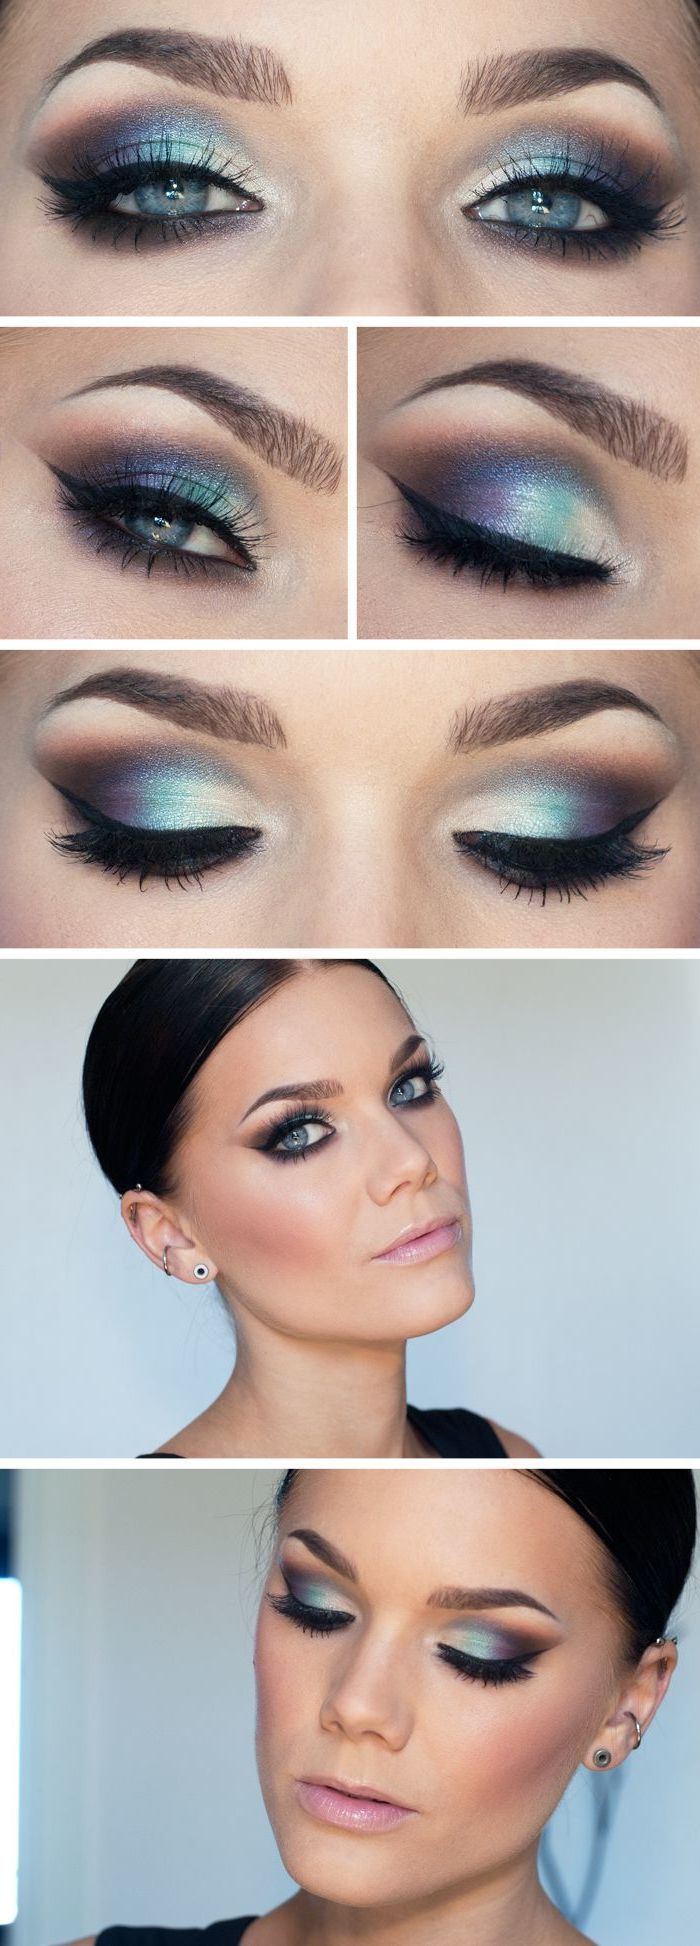 New Year's Eve make-up: 10 tips for brown and blue eyes!